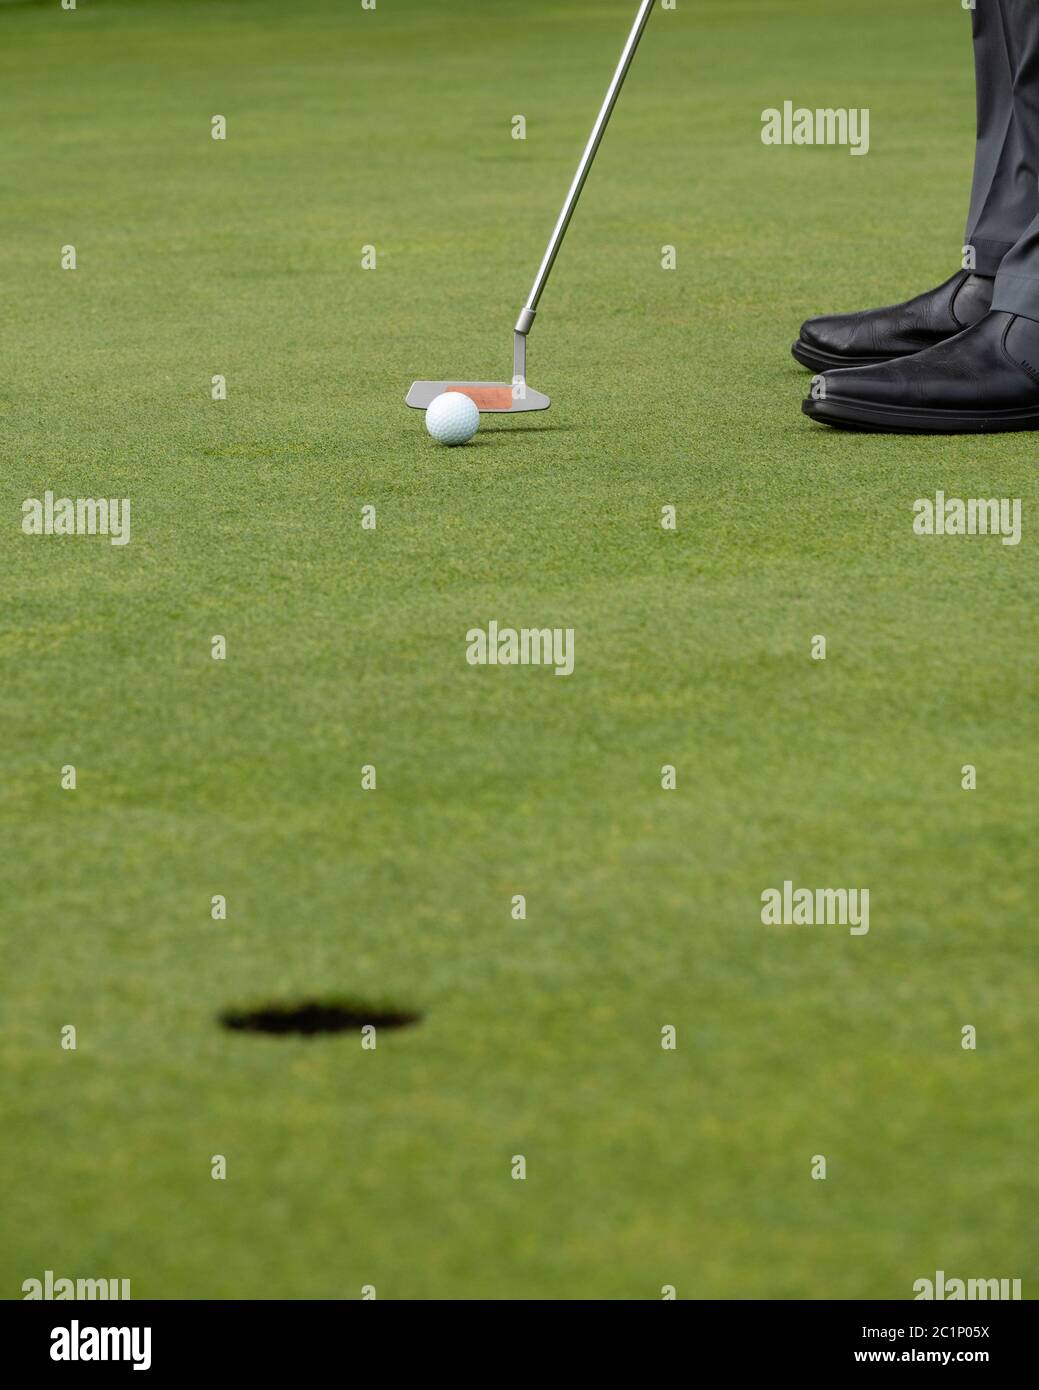 Man putting ball on golf green, close up view Stock Photo